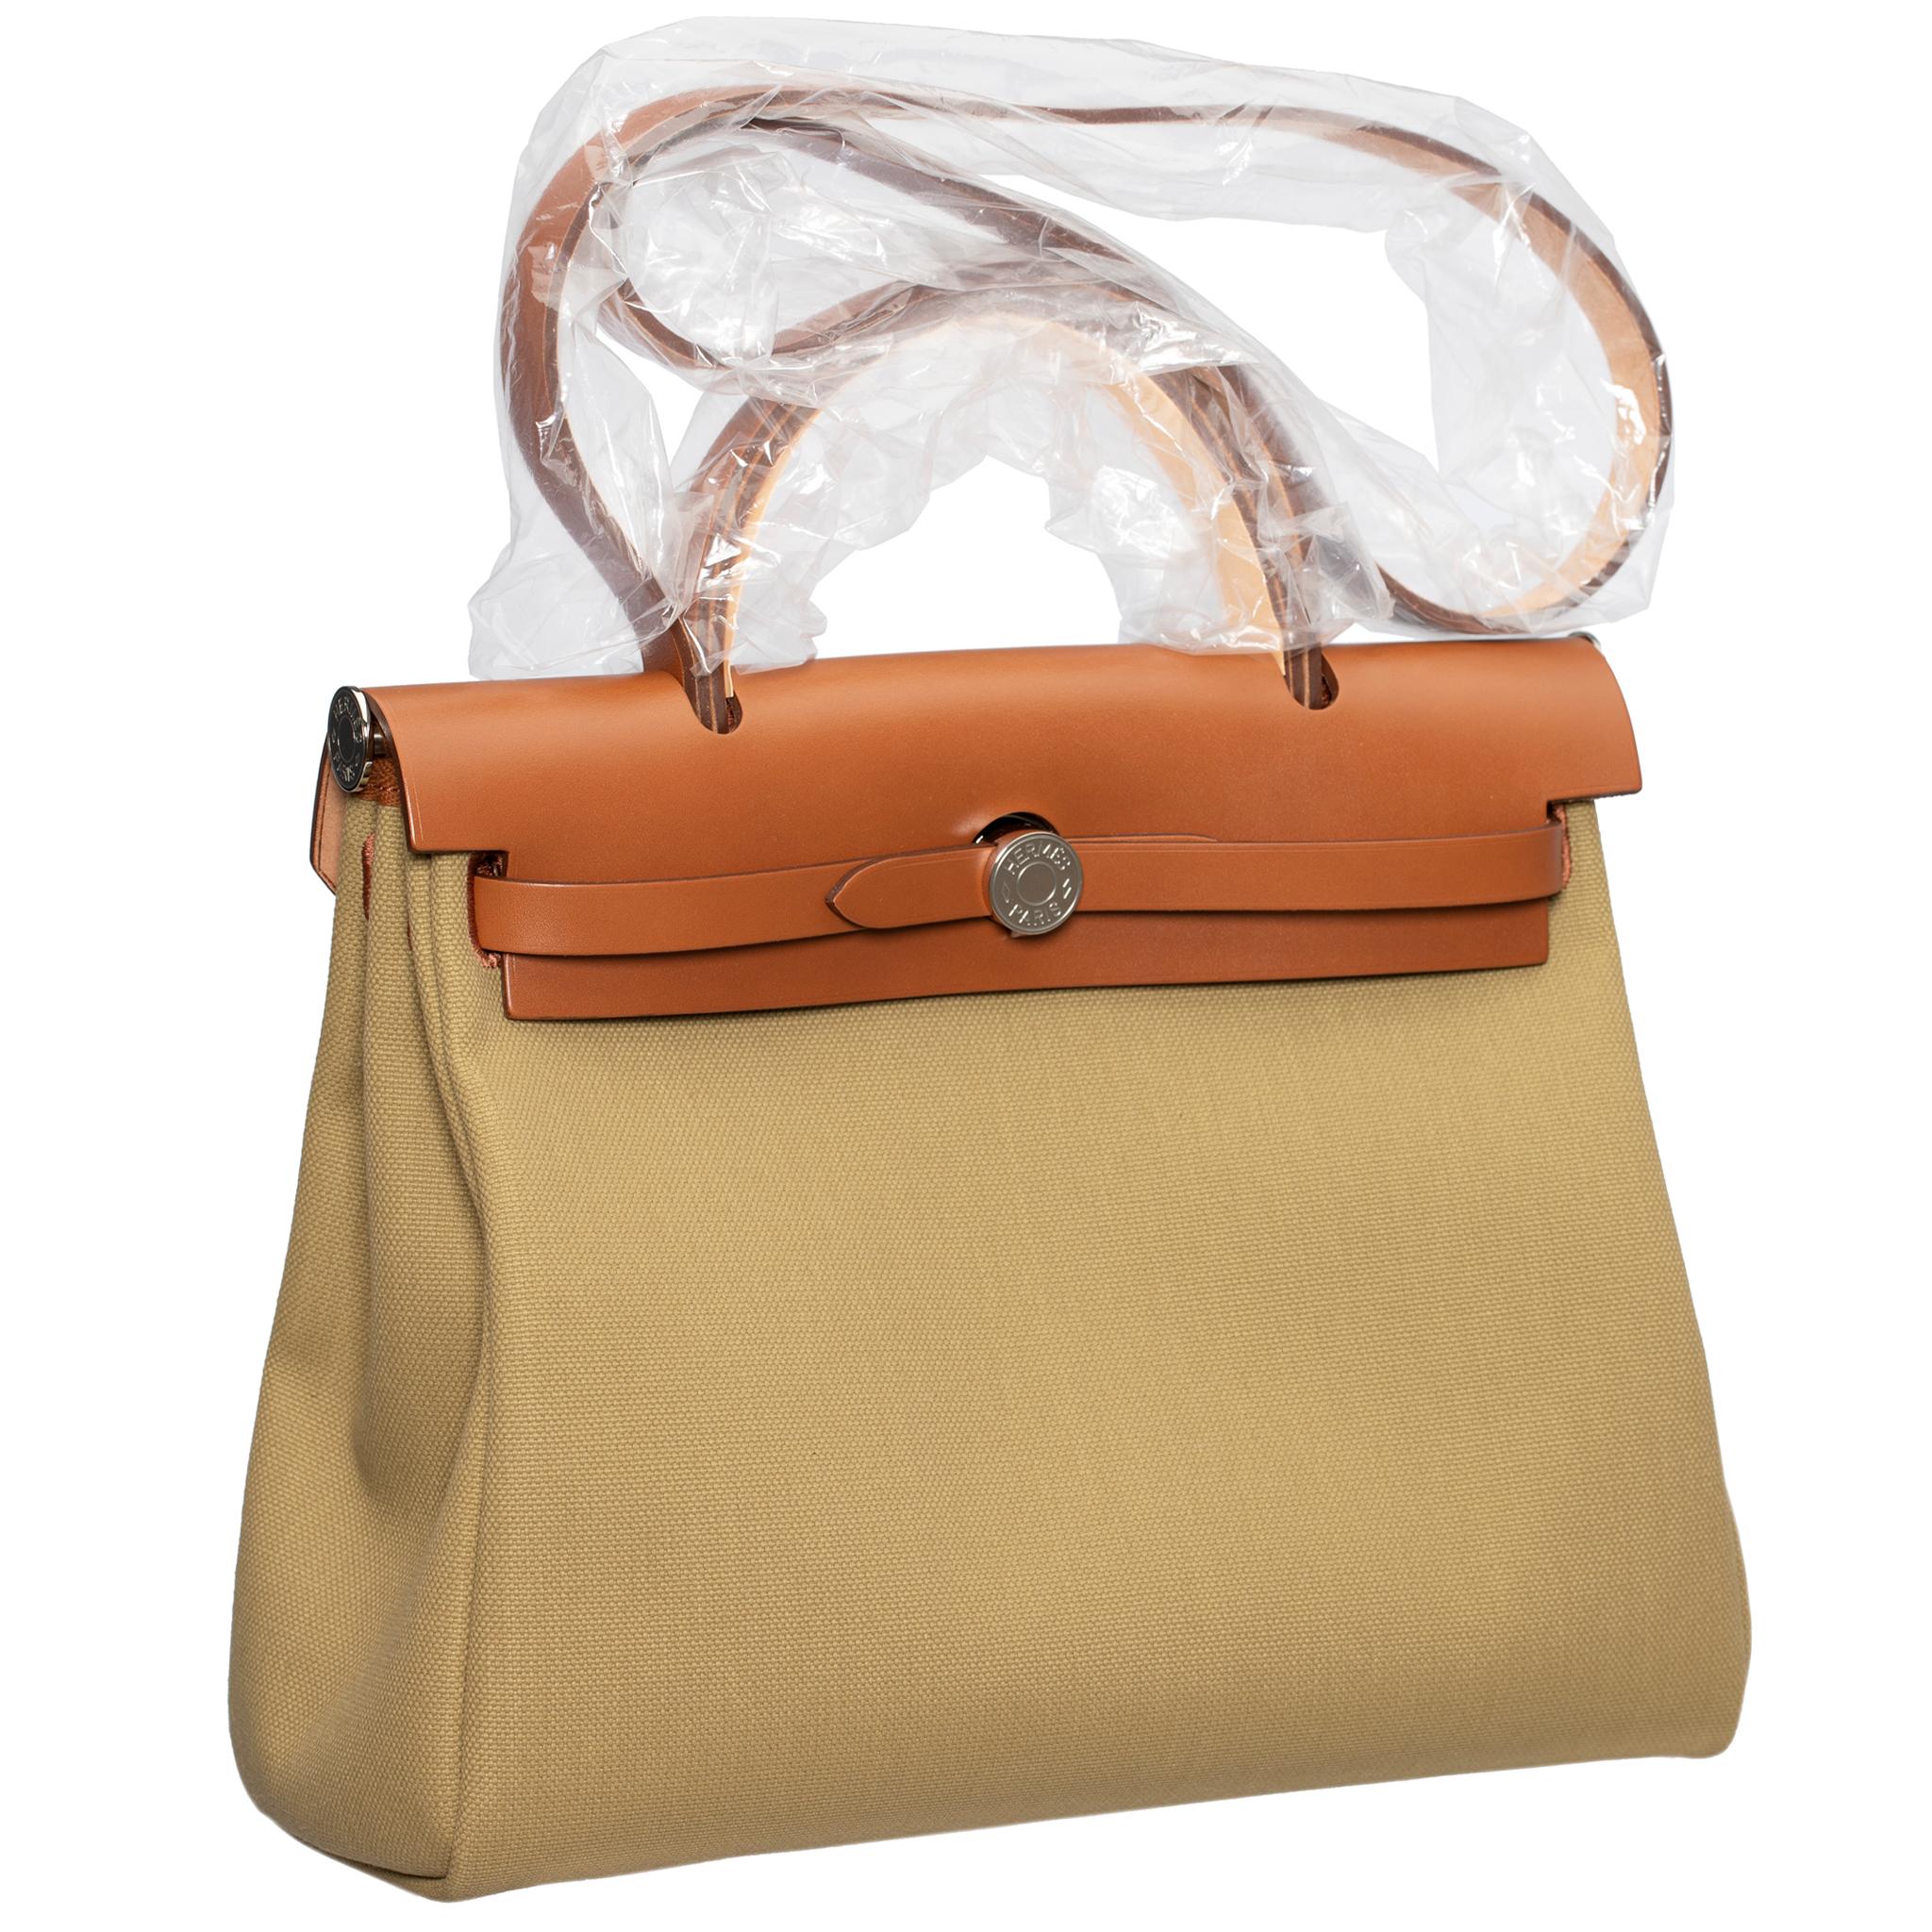 Hermes Herbag 31cm Fauve & Poussiere Vache Hunter and Toile Palladium Hardware

Brand: Hermès 
Style: Herbag
Size: 31cm
Color: Fauve and Poussiere
Leather: Vache Hunter and Toile
Hardware: Palladium
Stamp: Y 2020

Condition: Pristine; New or